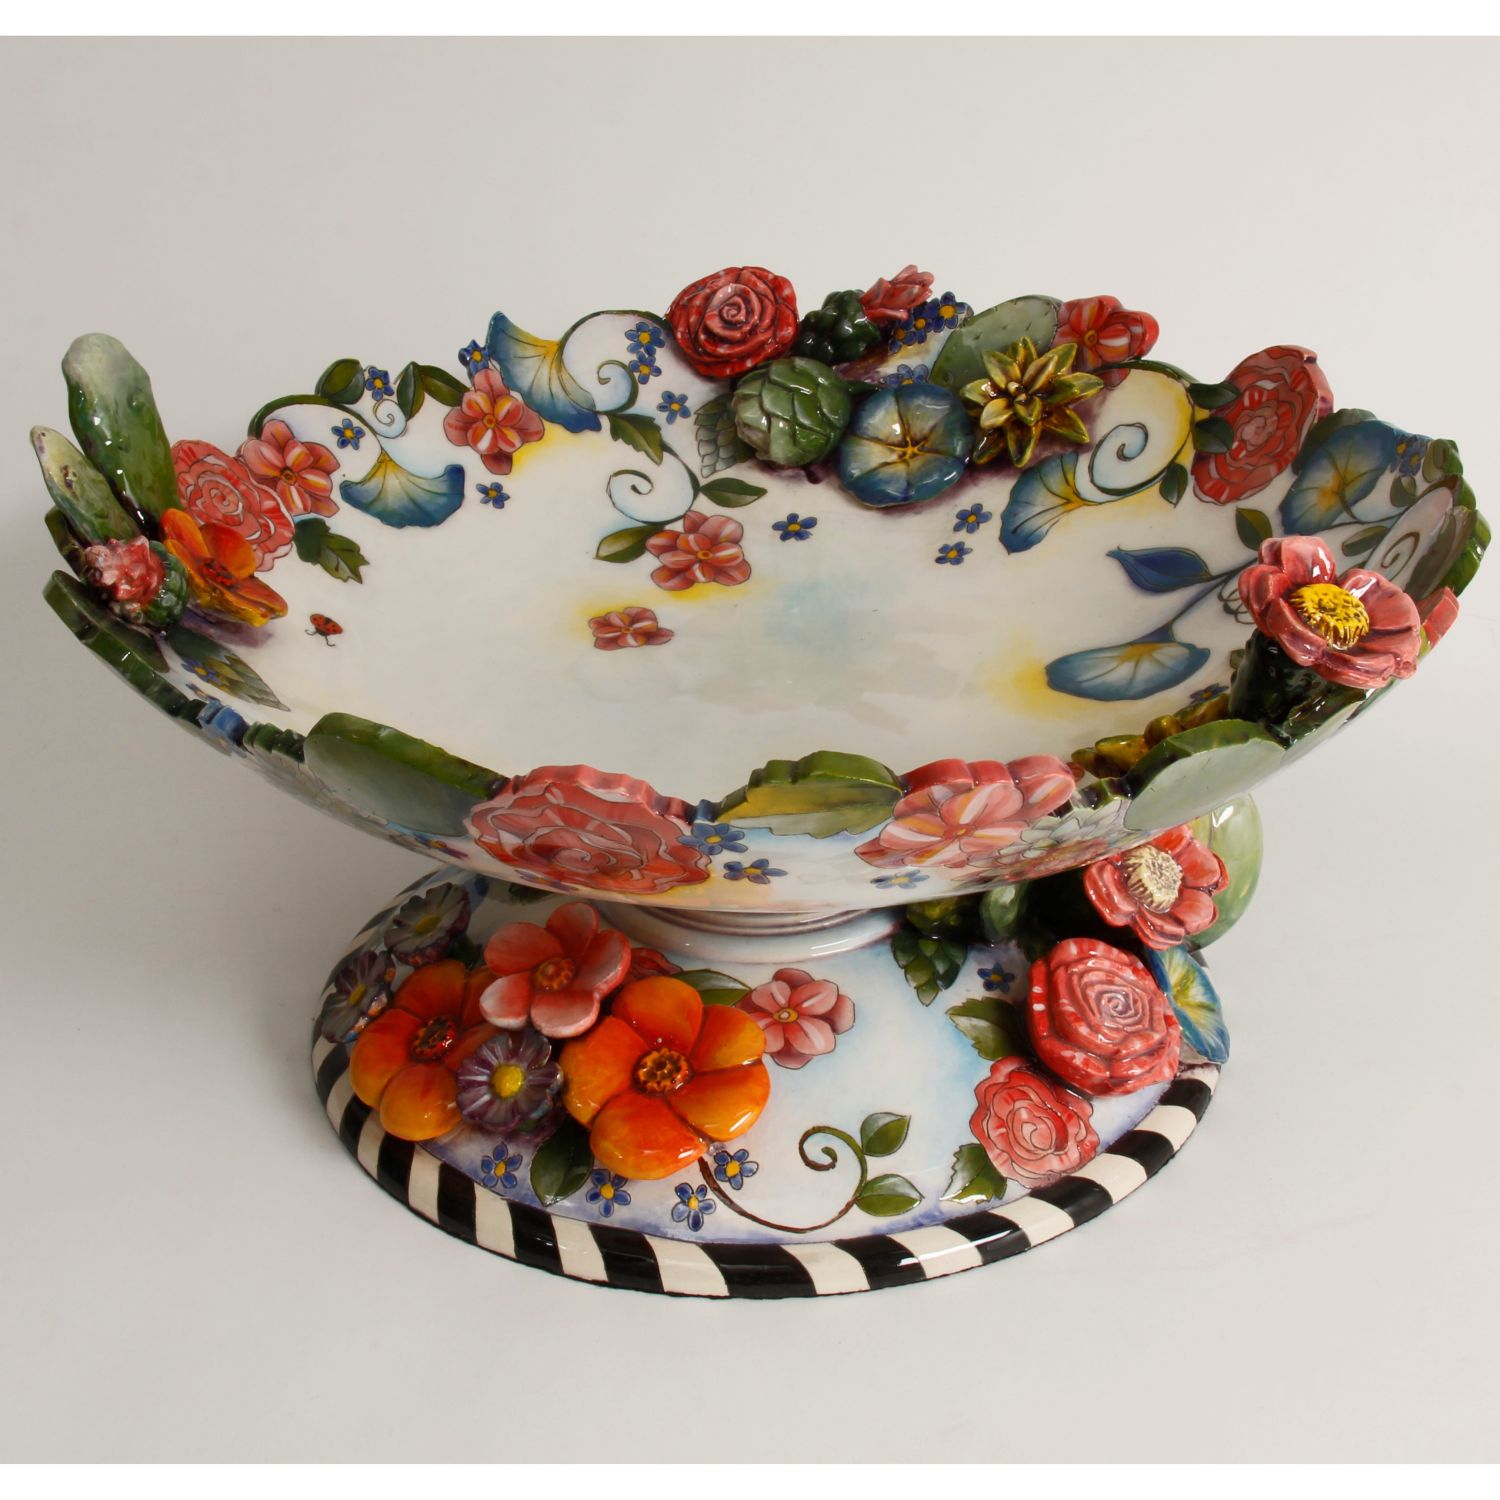 DaNisha Sculpture: Floral Bowl with Succulents Product Image 4 of 4